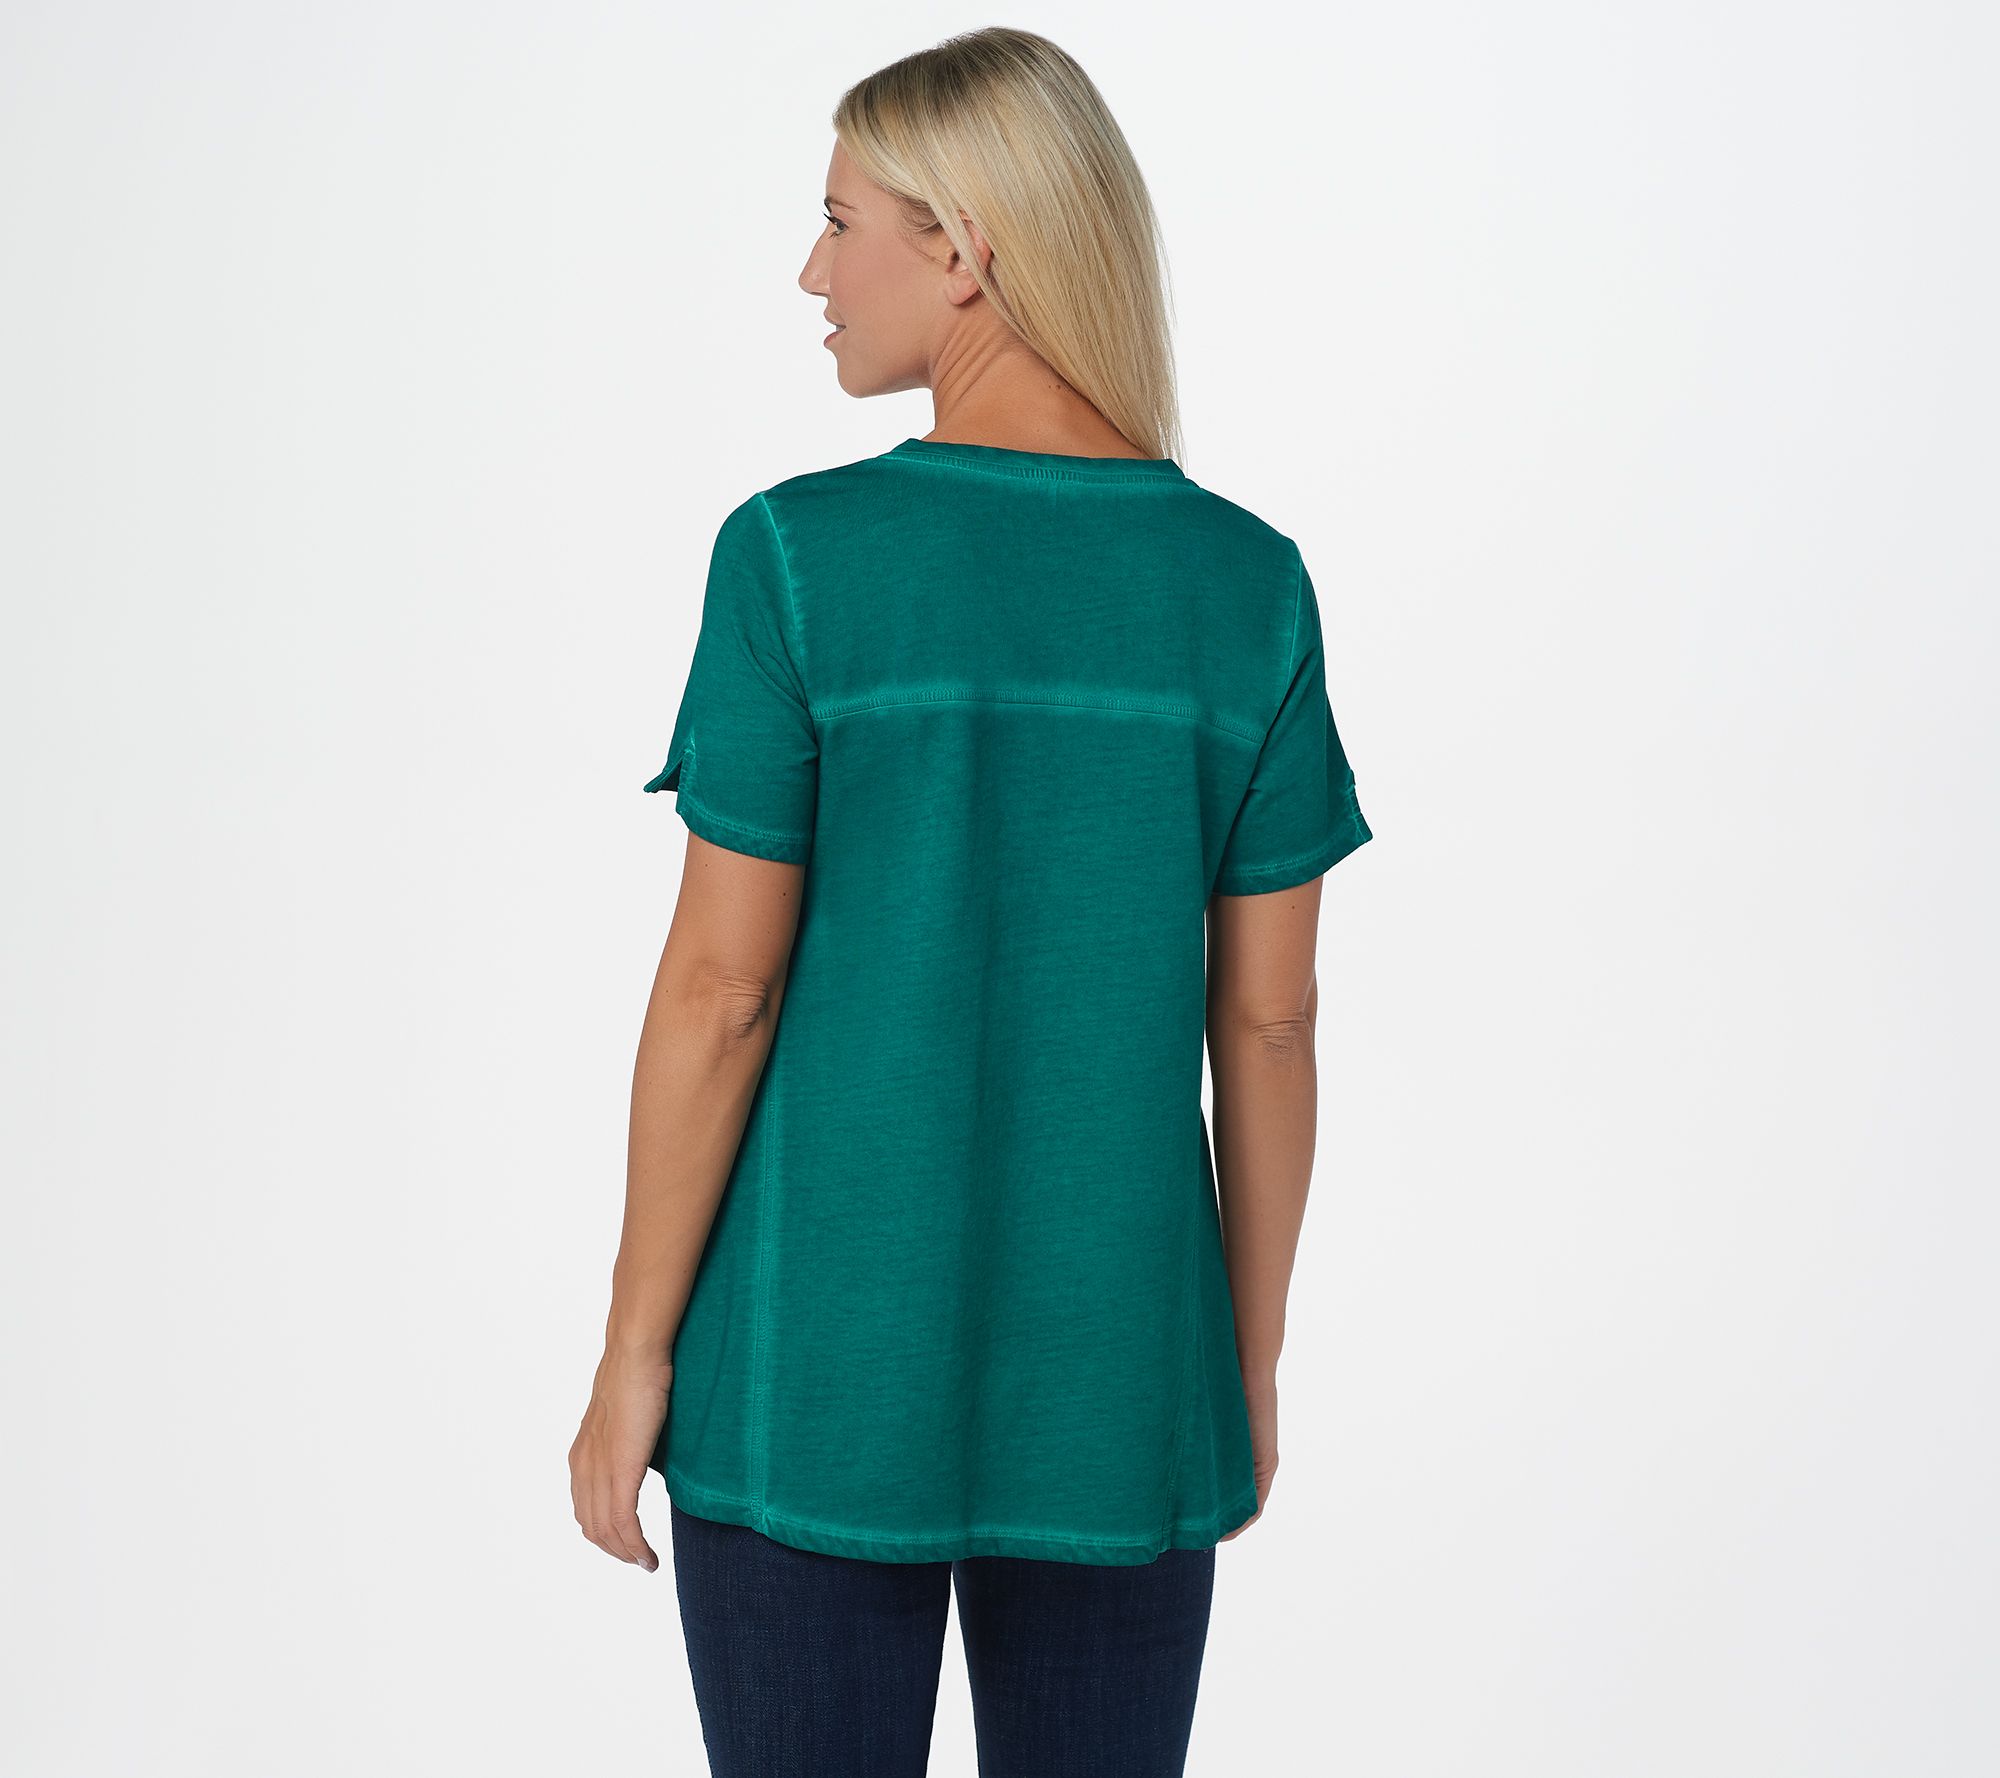 LOGO by Lori Goldstein Distressed Cotton Top with Godet Seams - QVC.com